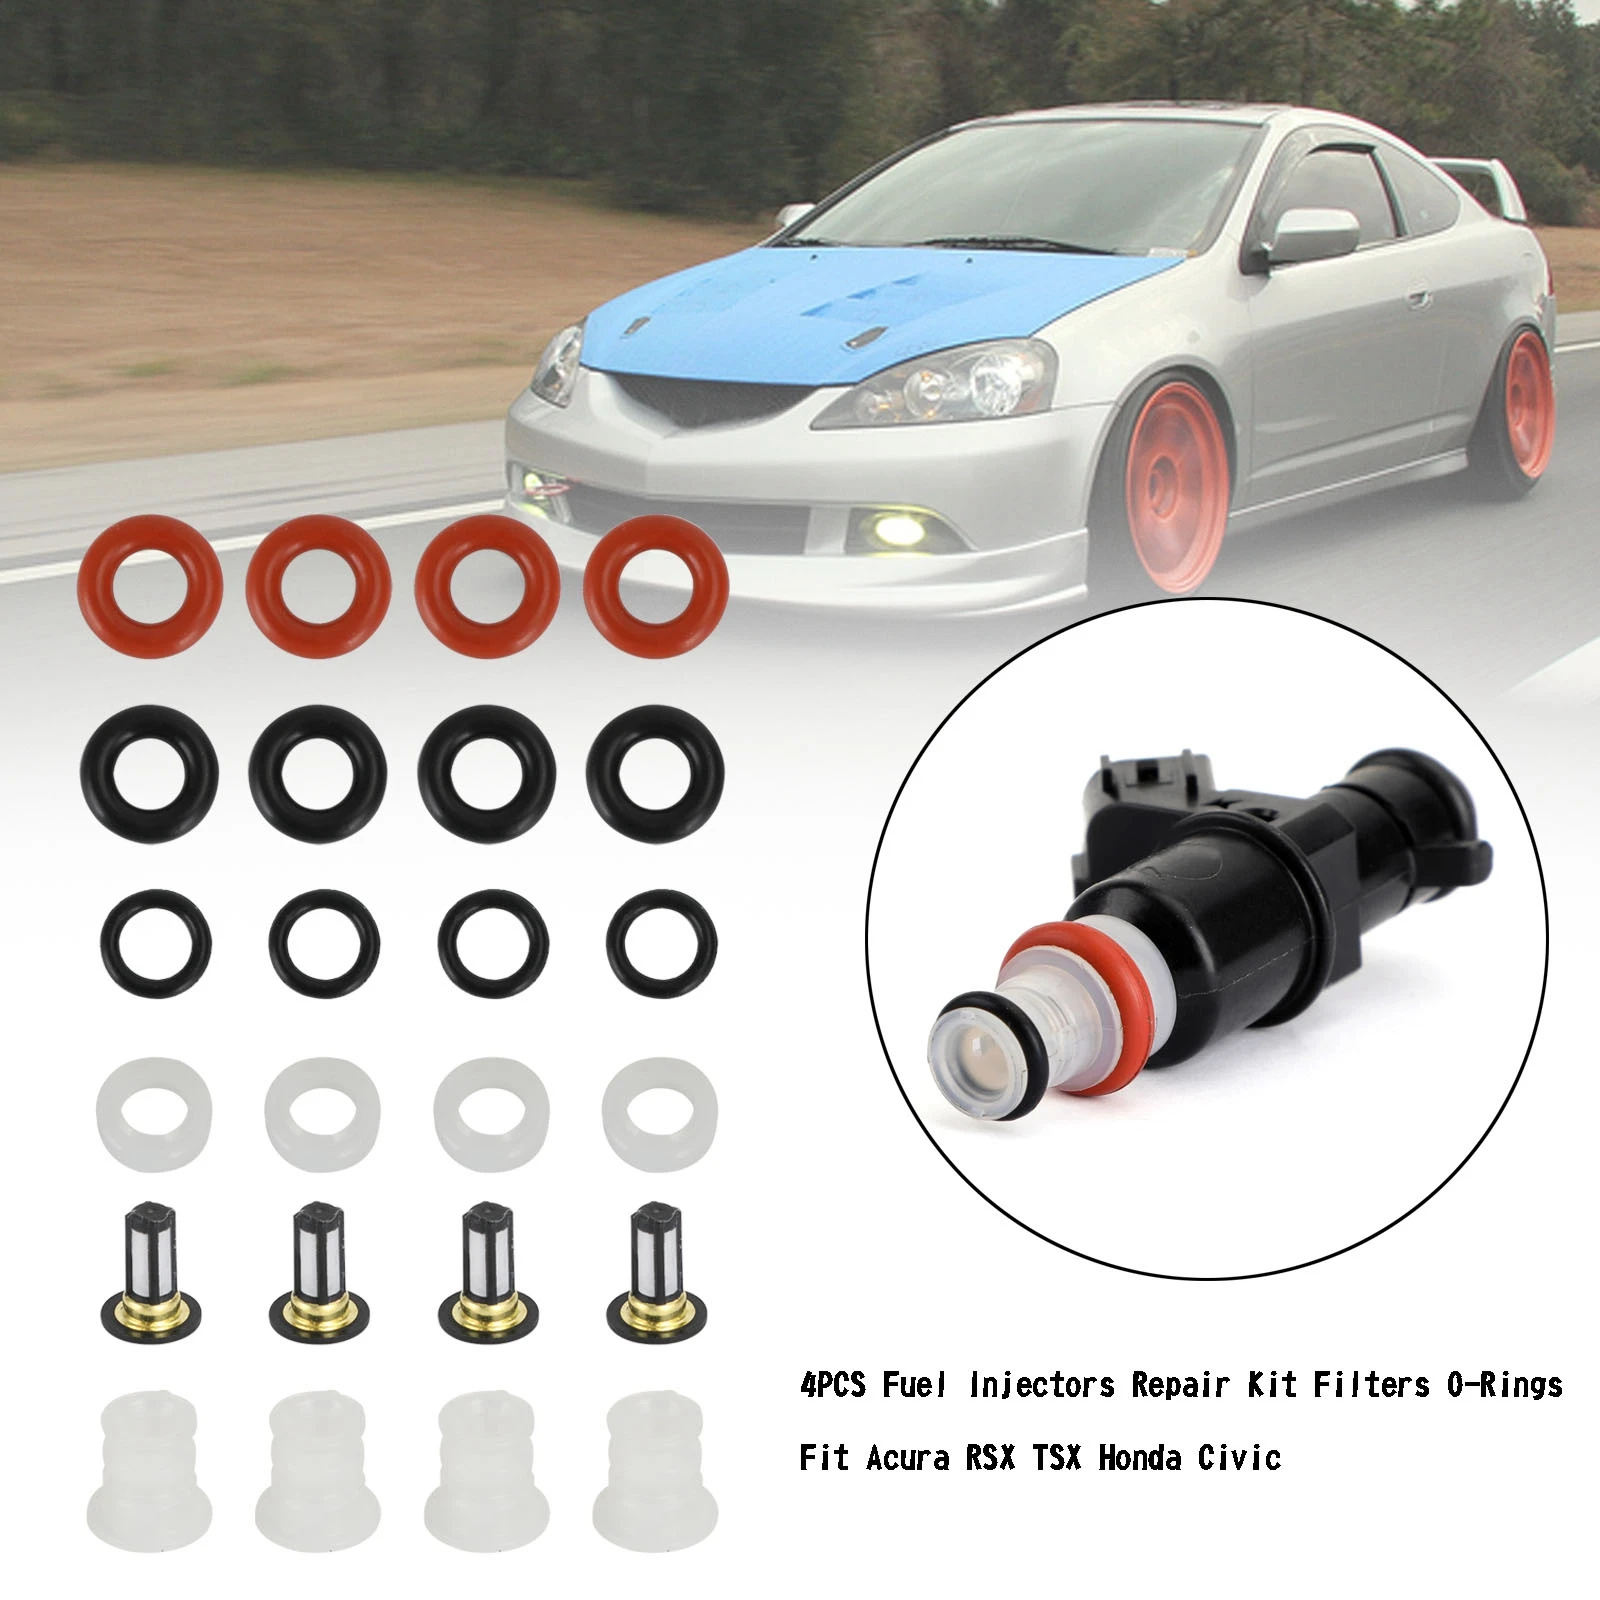 Topteng 4PCS Fuel Injectors Repair Kit Filters O-Rings Fit For Acura RSX TSX Honda Civic